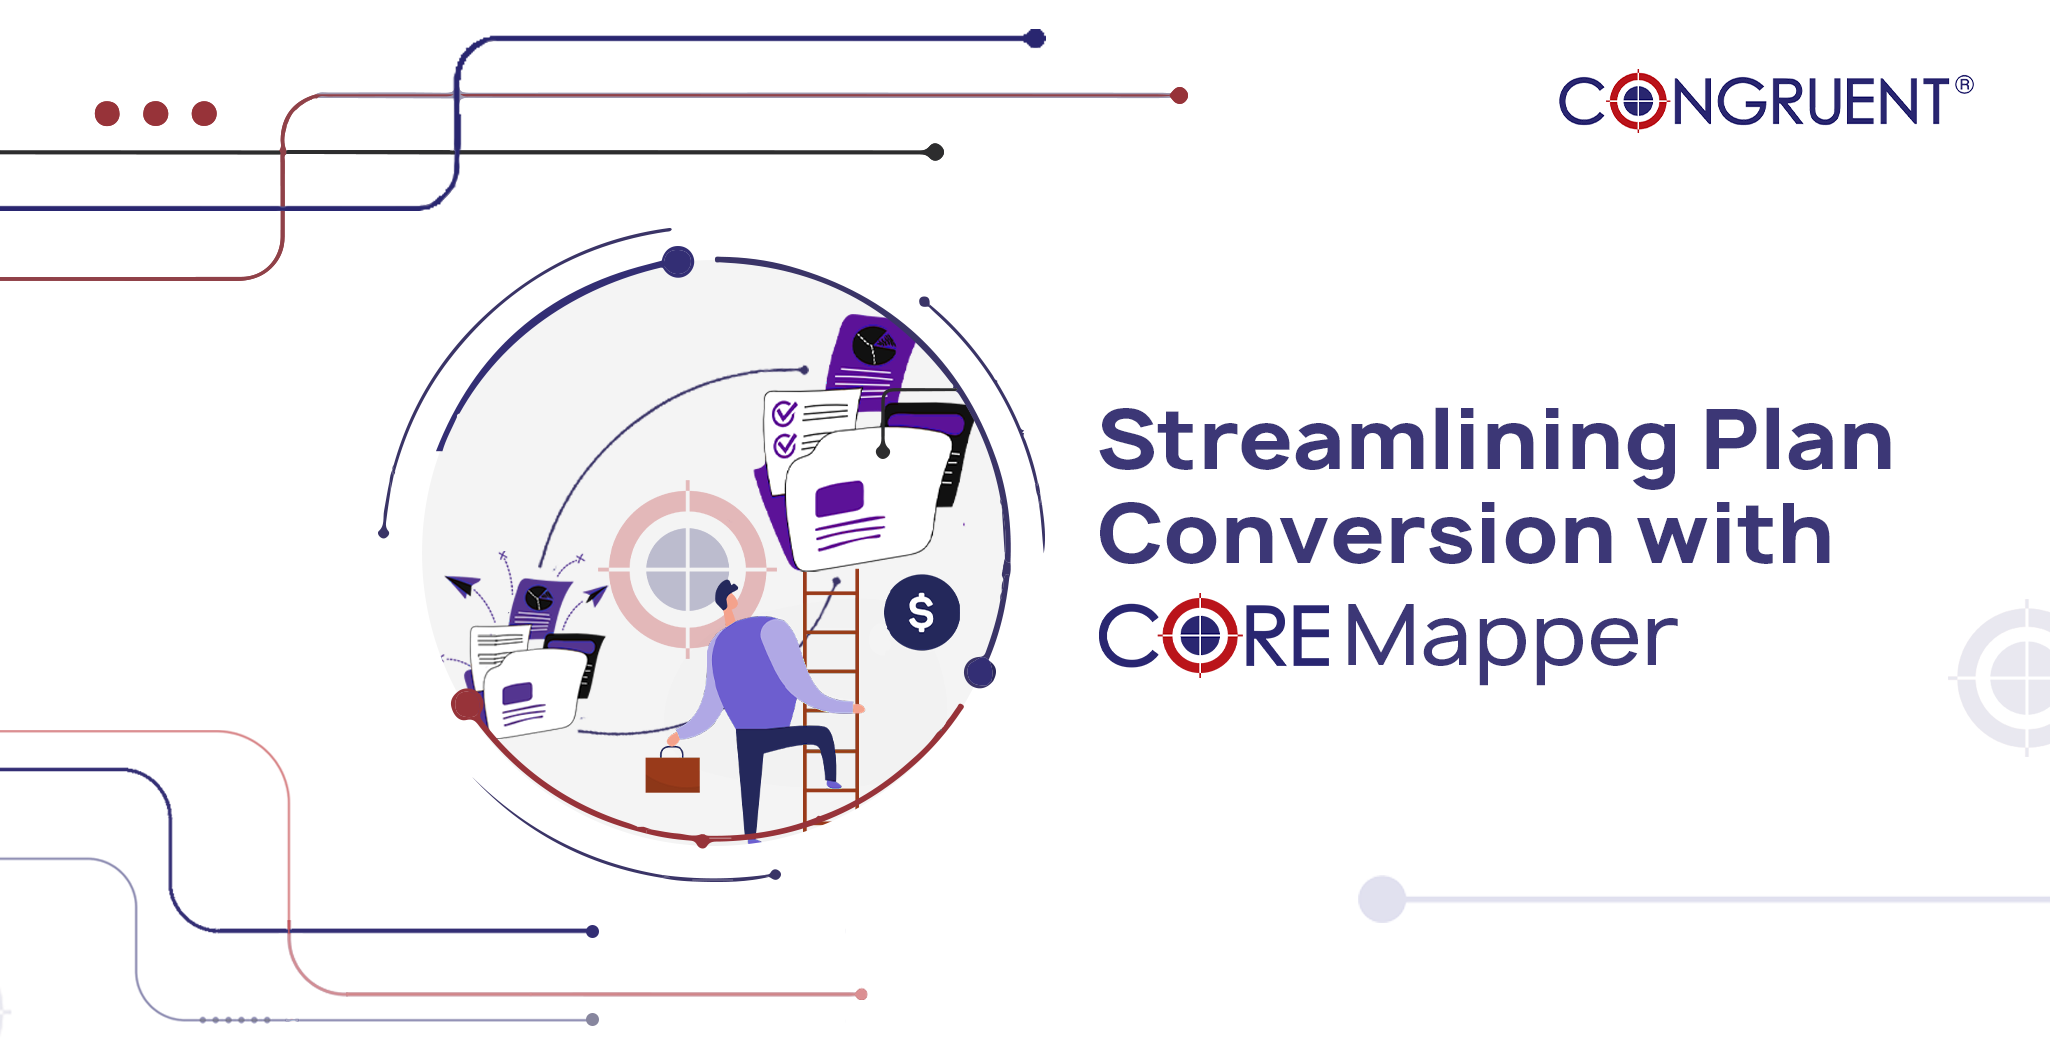 Streamlining Plan Conversion with CORE Mapper